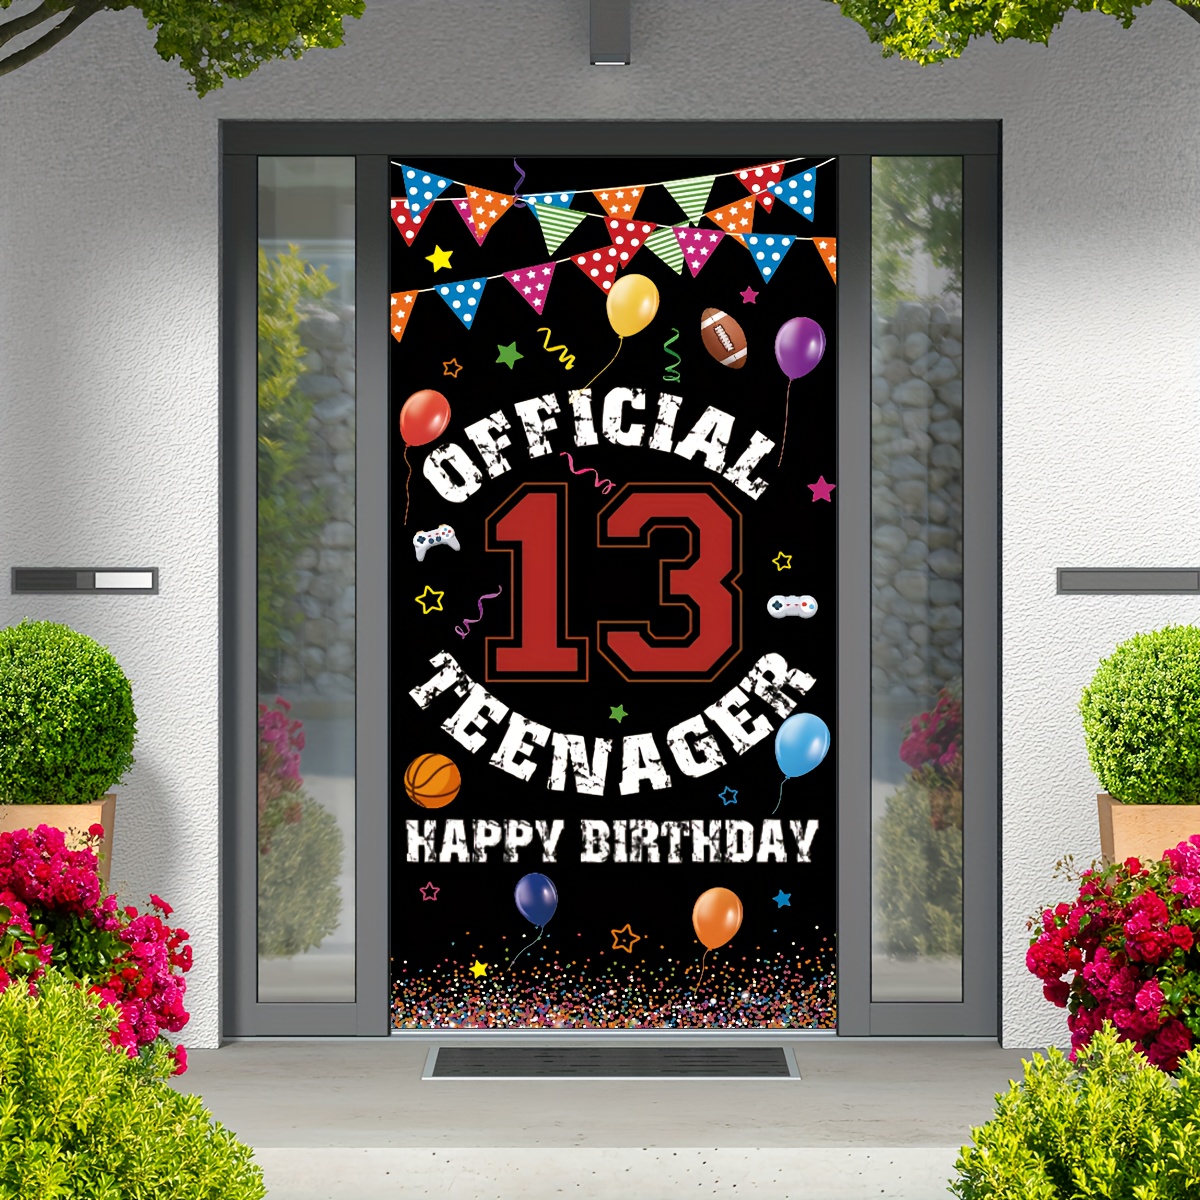 

1pc, 71x35in Official 13th Birthday Door Backdrop Banner, Happy 13th Birthday Decorations For Boys Girls, Black White 13 Year Old Birthday Party Yard Sign Photo Props For Outdoor Indoor